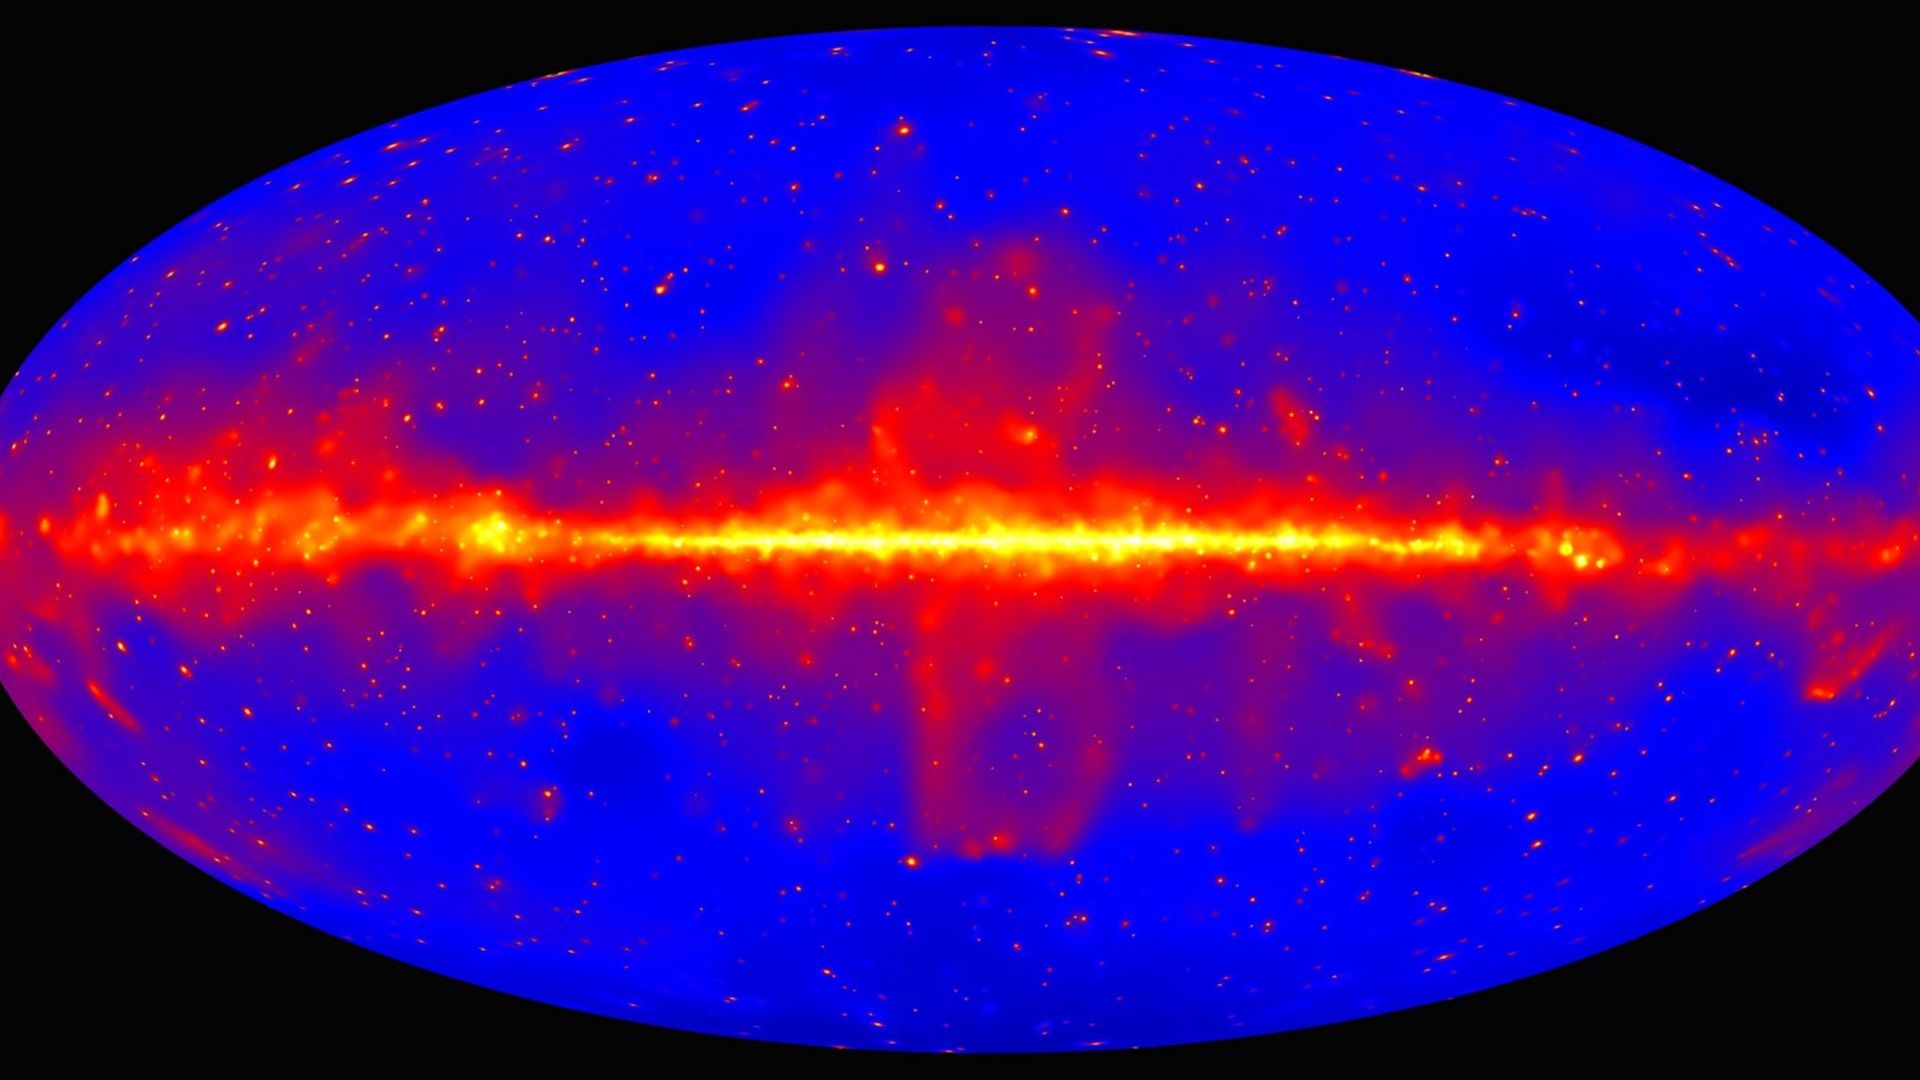 Constructed using nine years of observations by Fermi’s Large Area Telescope, this map shows how the gamma-ray sky appears at energies above 10 billion electron volts.